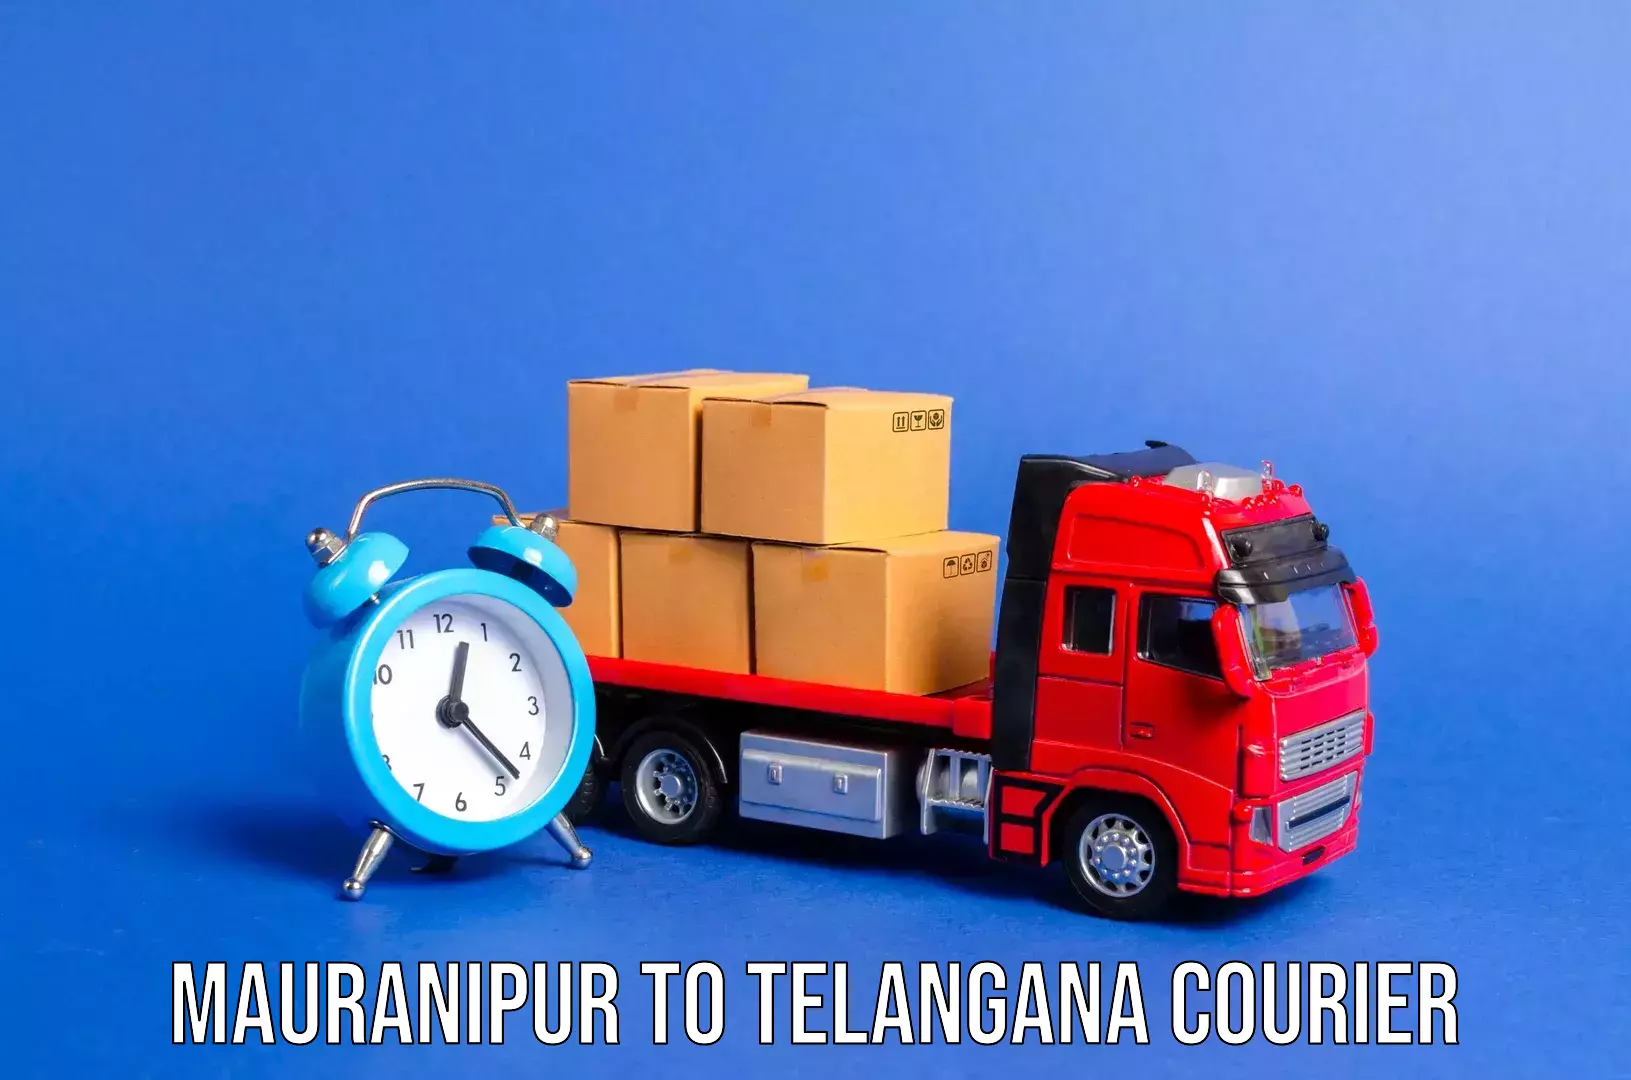 Baggage transport network Mauranipur to Metpally